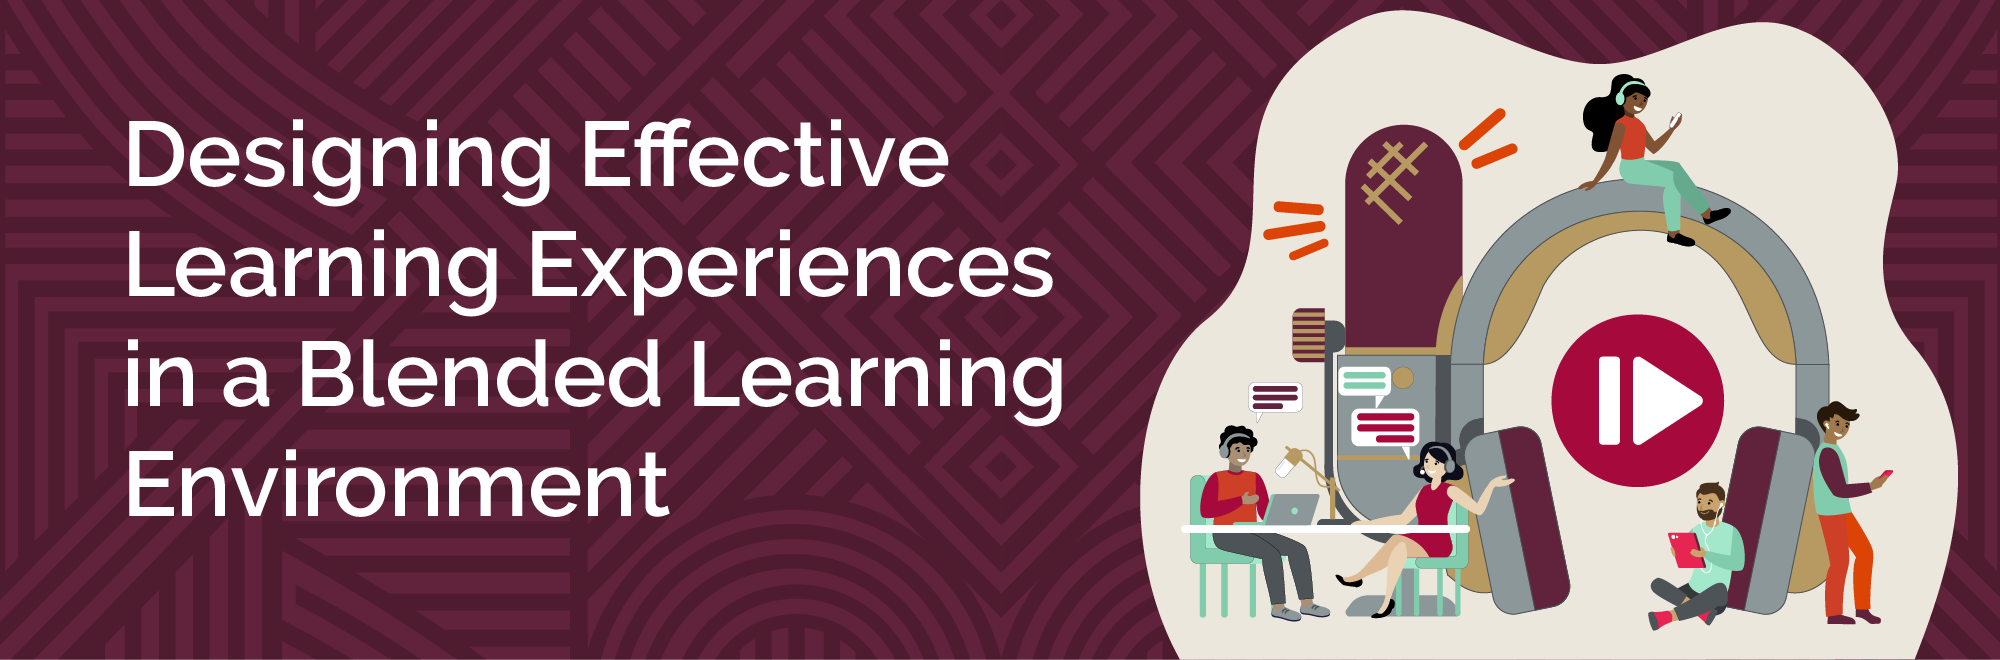 Designing Effective Learning Experiences in a Blended Learning Environment_.png